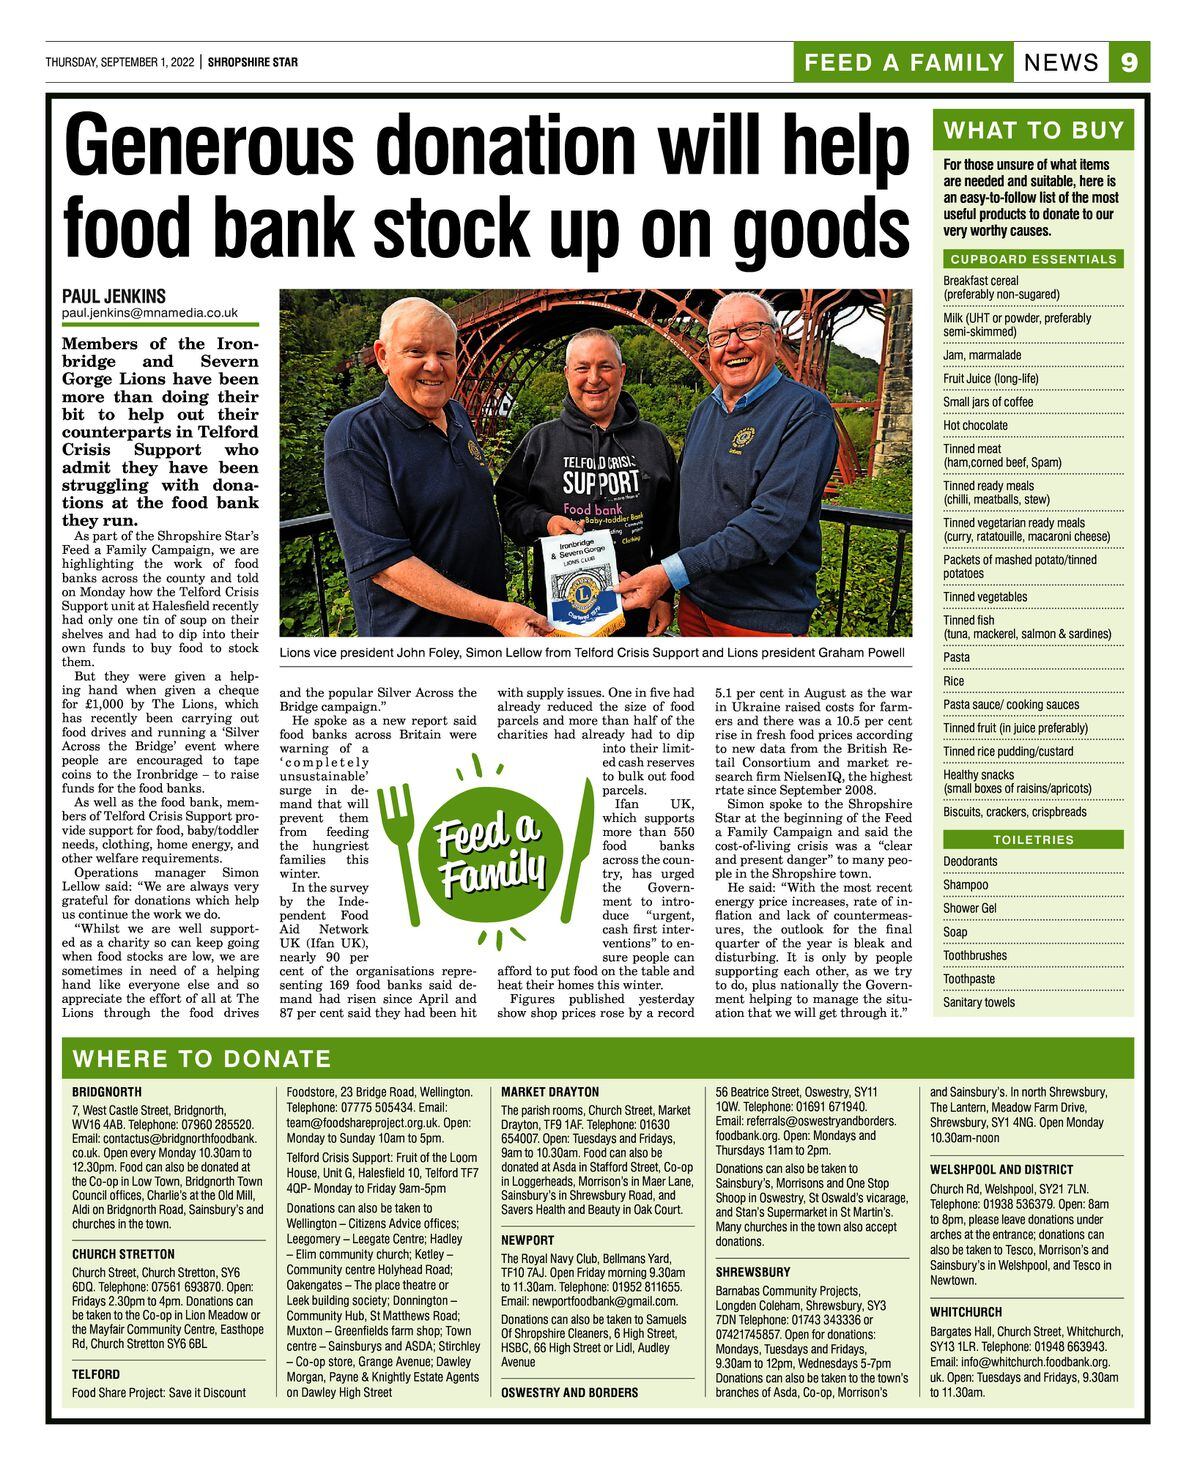 Feed a Family coverage in the Shropshire Star 